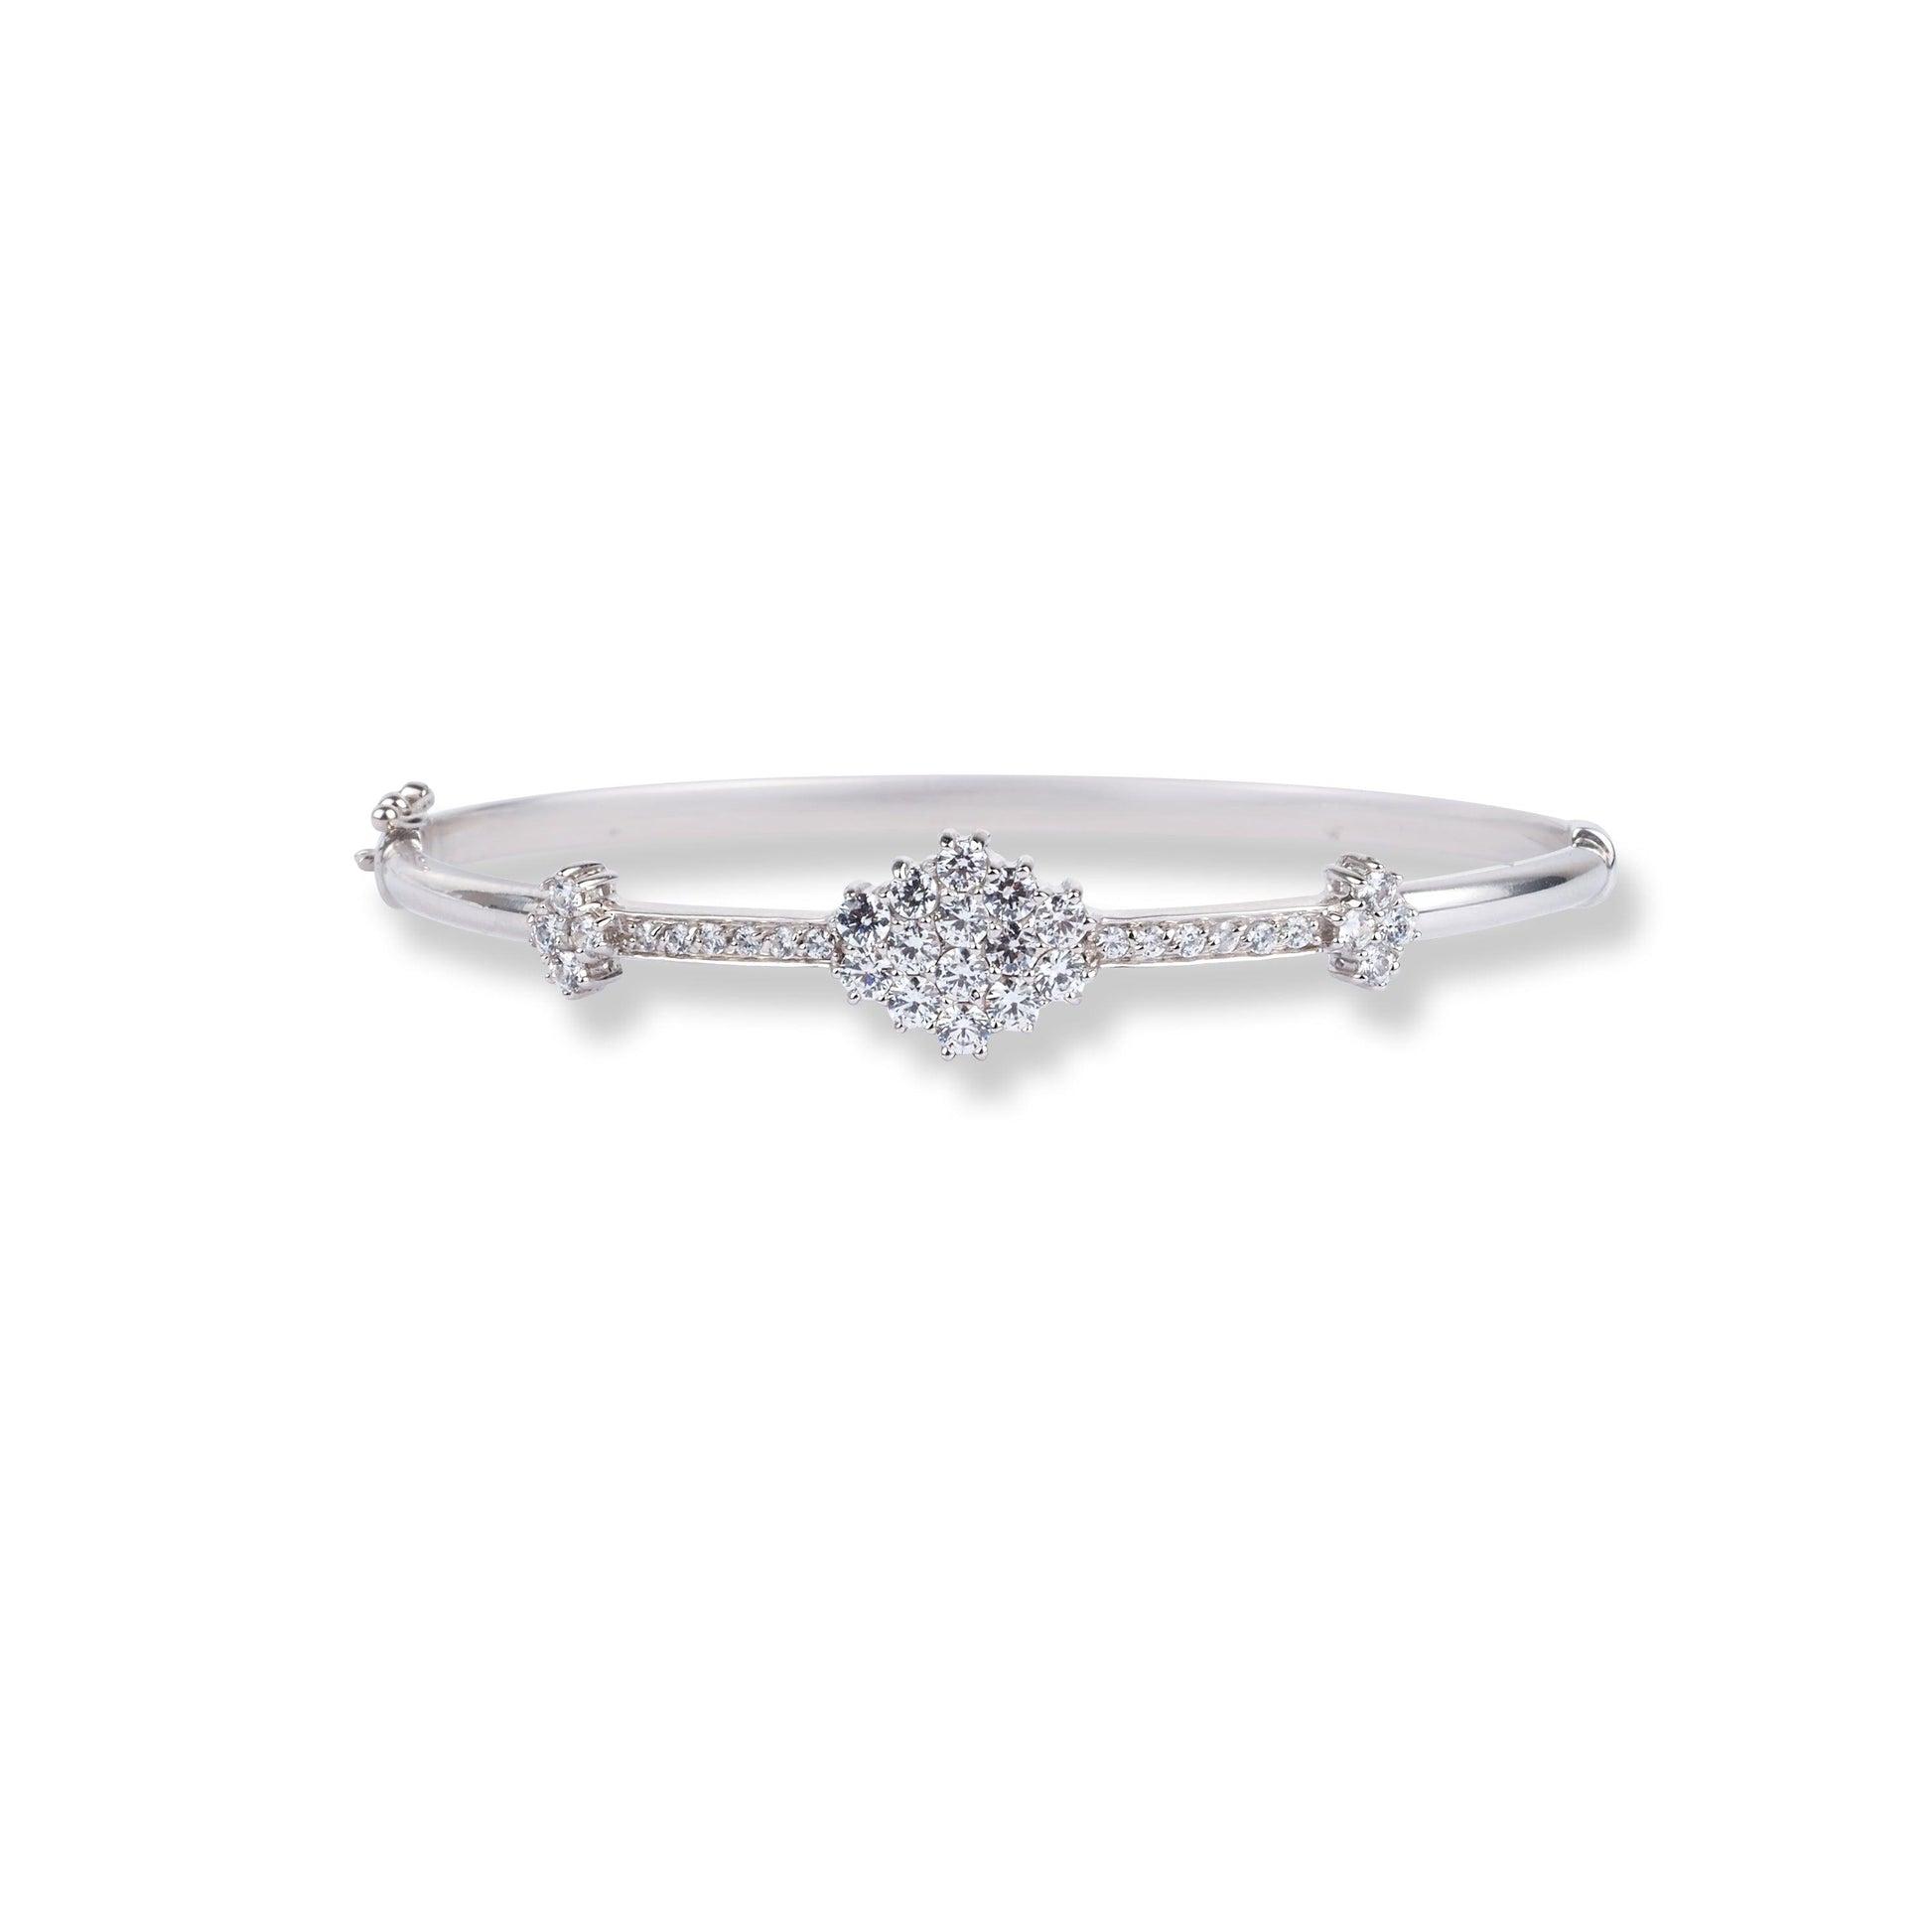 18ct White Gold Openable Bangle with Cubic Zirconia Stones VLKB017 - Minar Jewellers